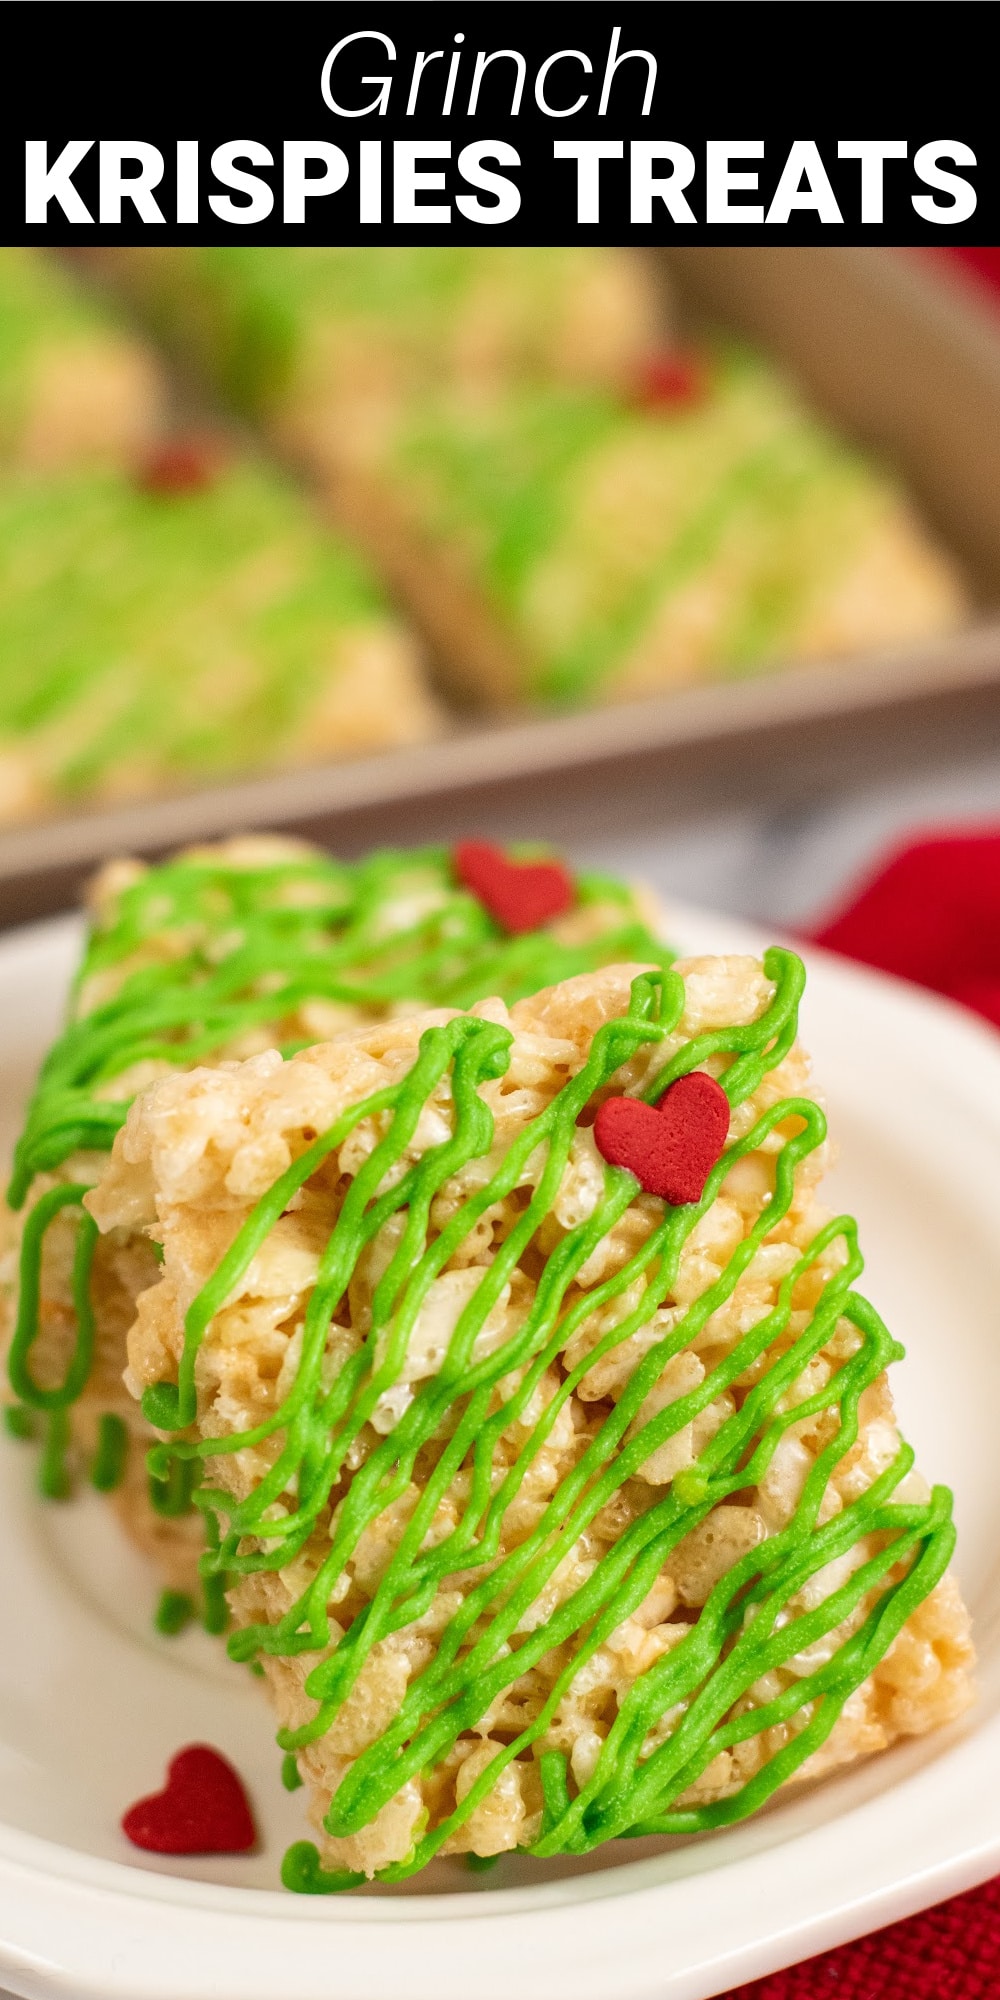 These cute Grinch Rice Krispie Treats will add a fun and festive twist to your dessert table this holiday season. Drizzled with bright green chocolate and adorned with precious little red candy hearts, these easy no-bake treats will be a hit with kids and adults alike.